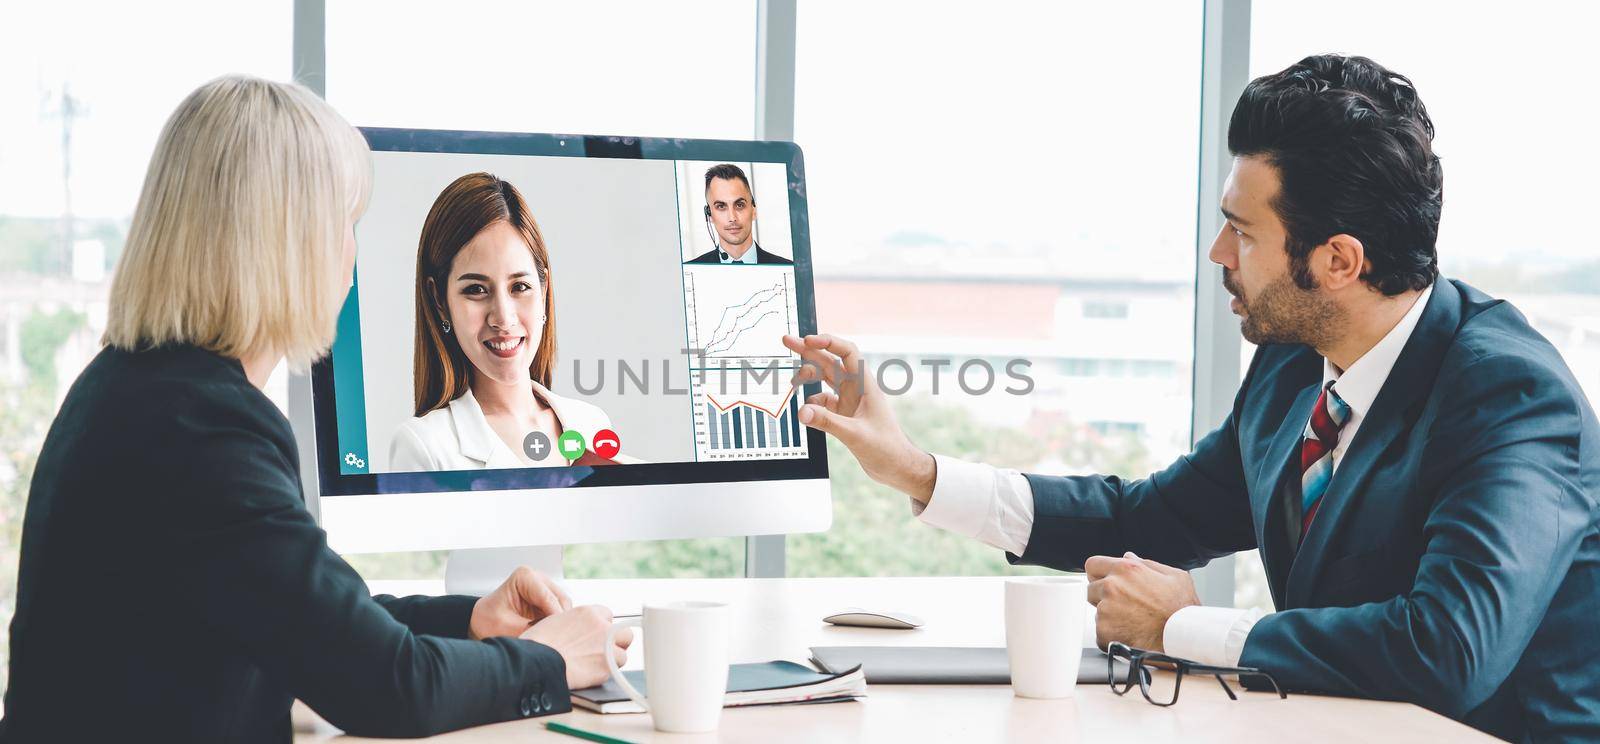 Video call group business people meeting on virtual workplace or remote office by biancoblue